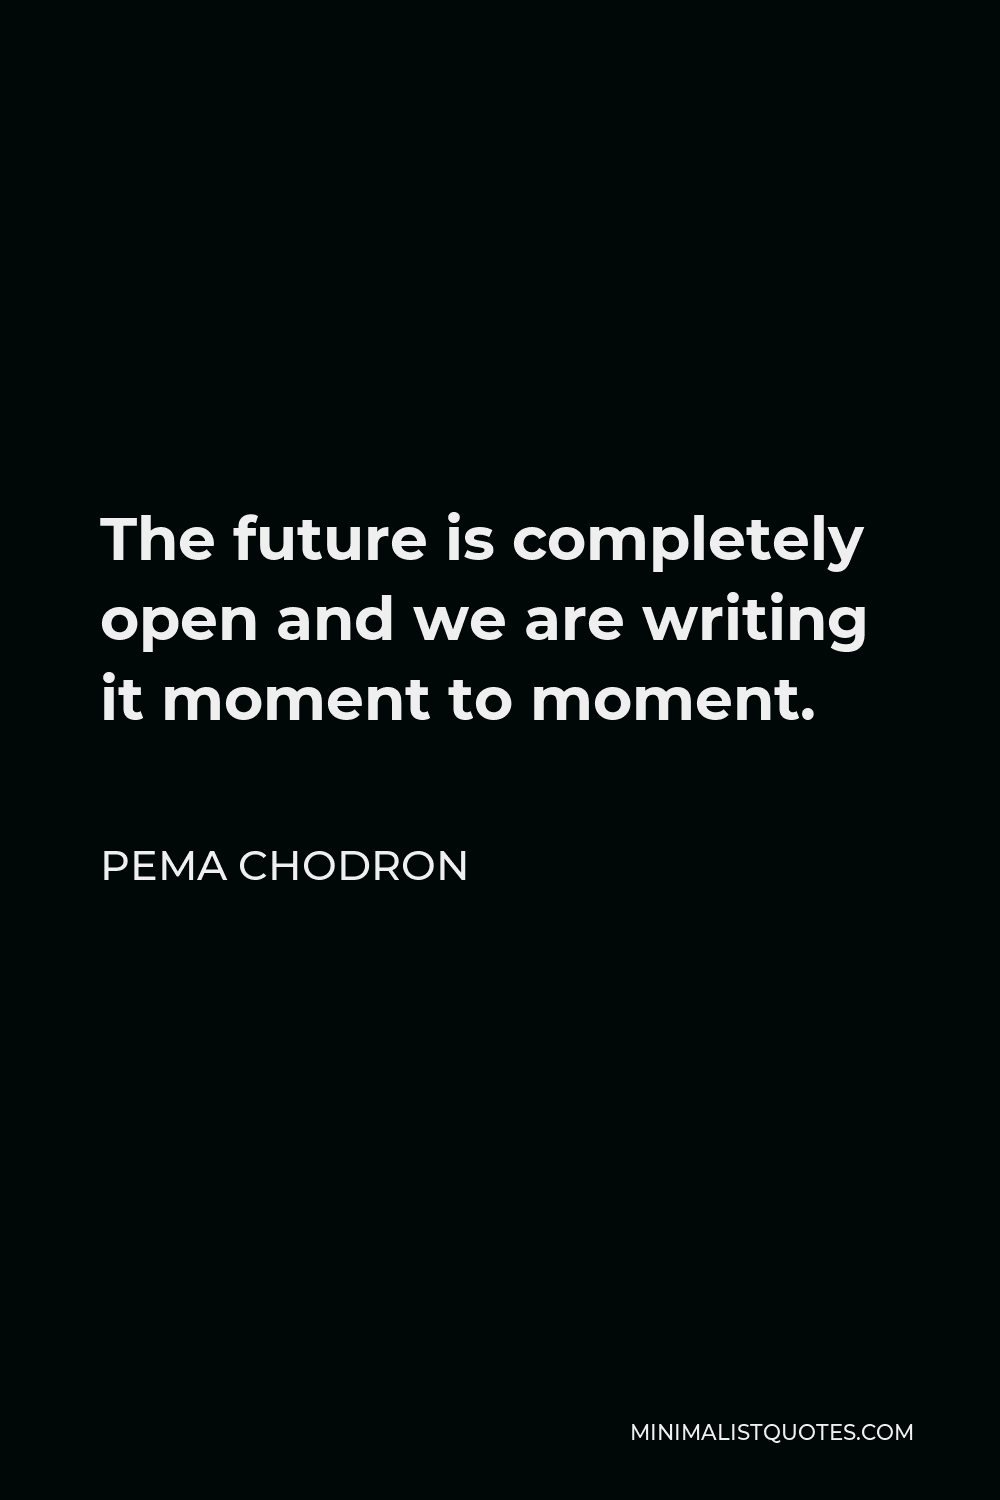 Pema Chodron Quote - The future is completely open and we are writing it moment to moment.